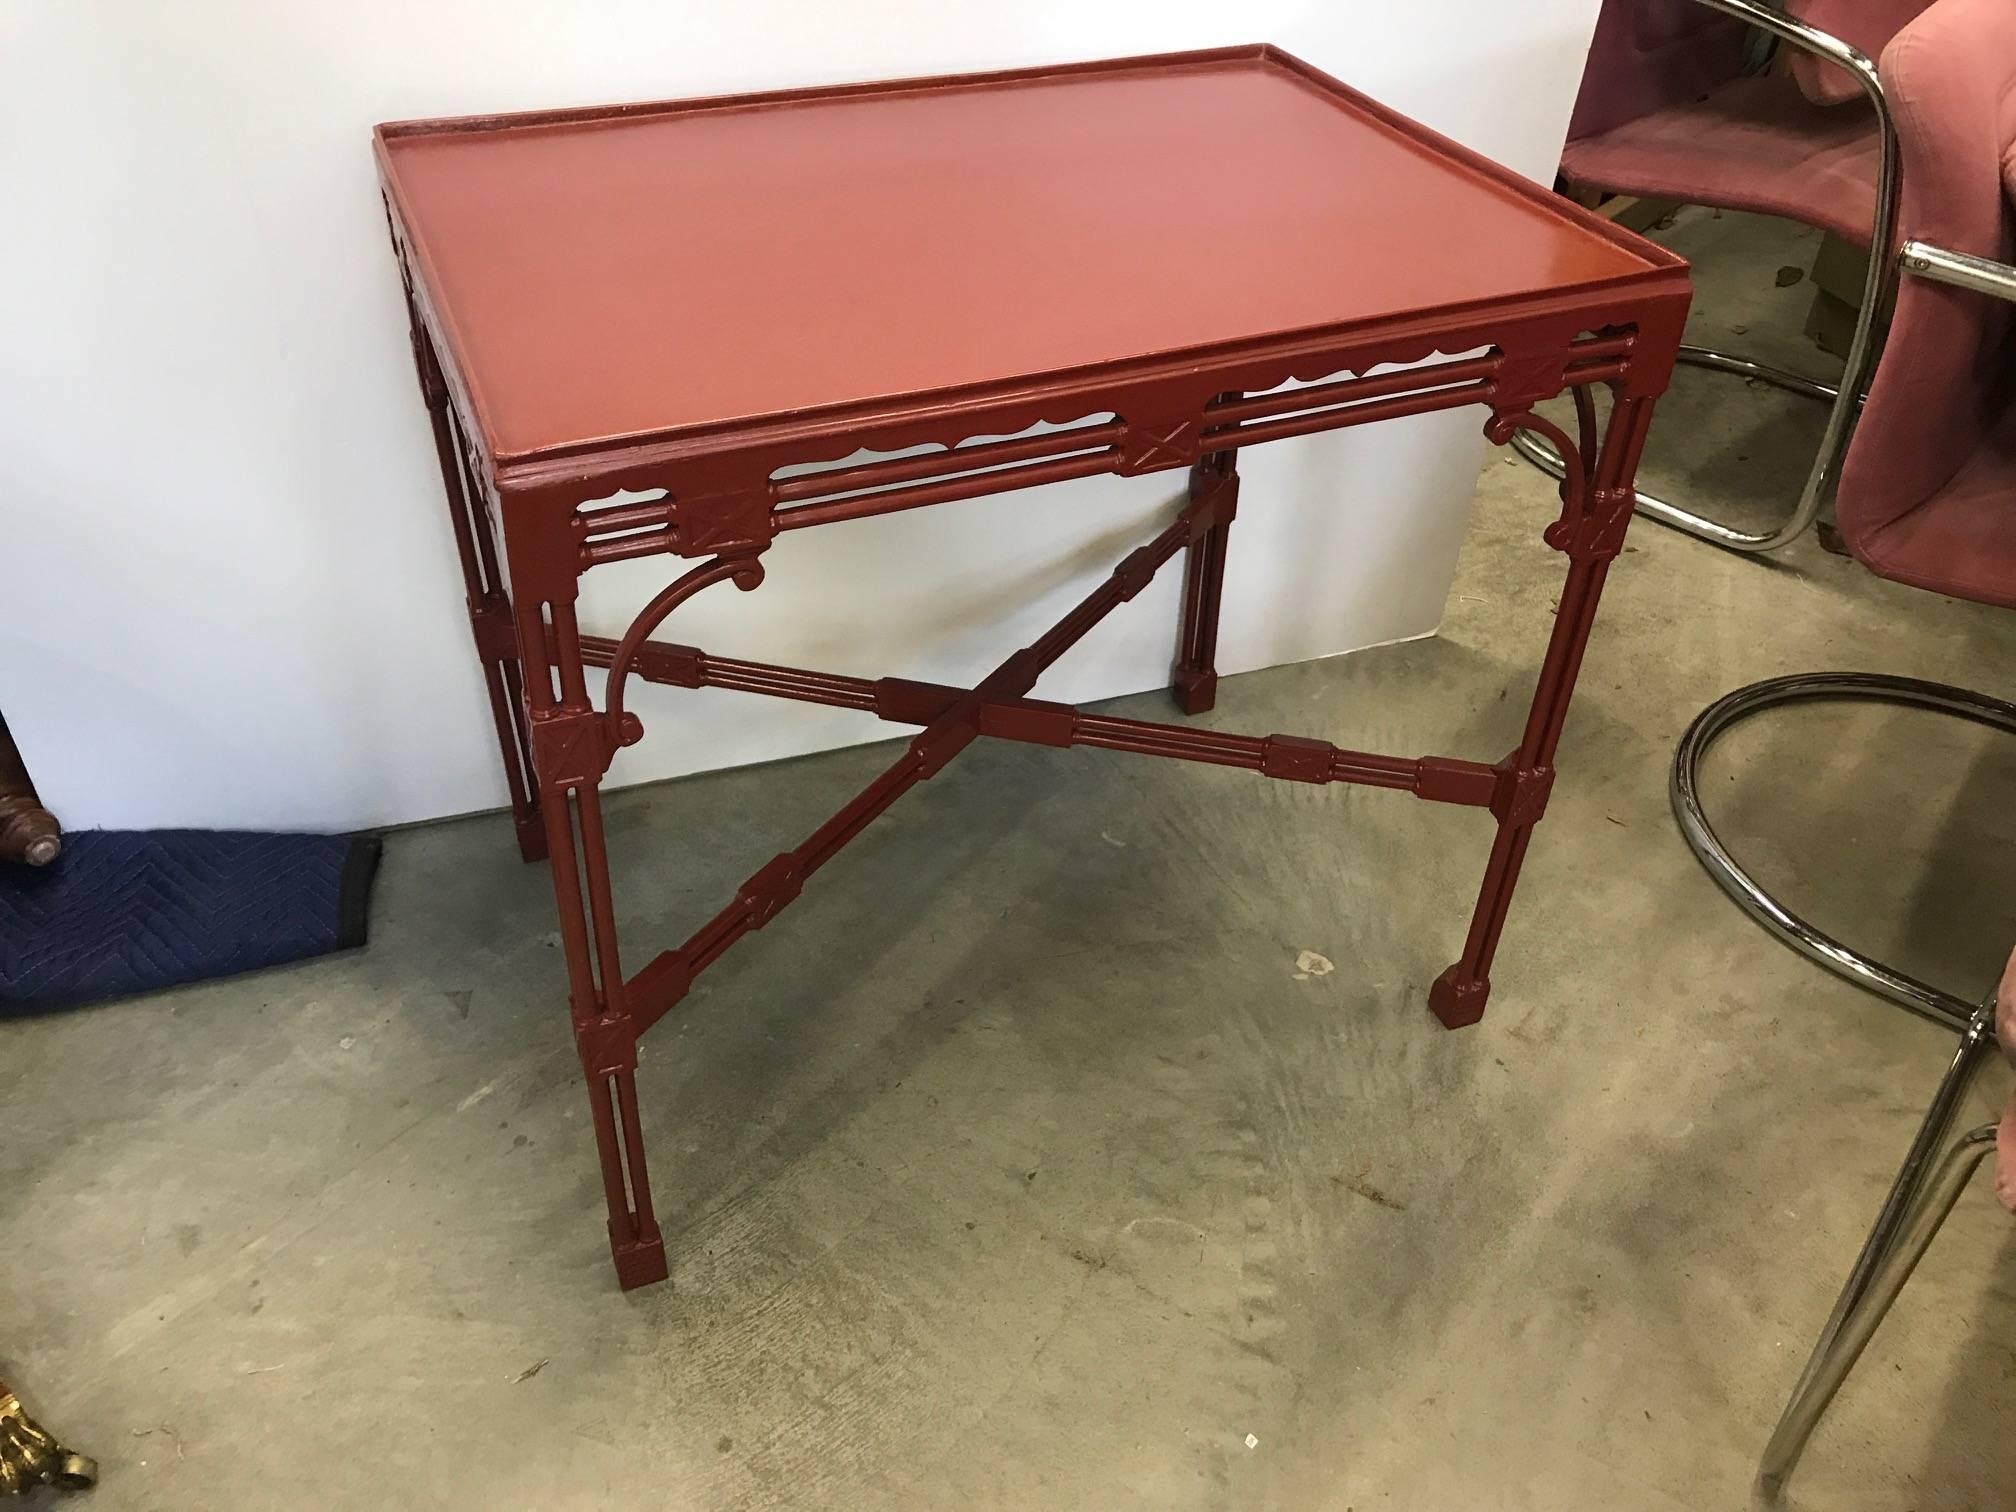 A traditional Chinese Chippendale English style tea table. This Classic styled table is lacquered in a cinnabar red and can be used in a traditional or more modern setting. The square top with slight gallery edge is supported by four legs made of